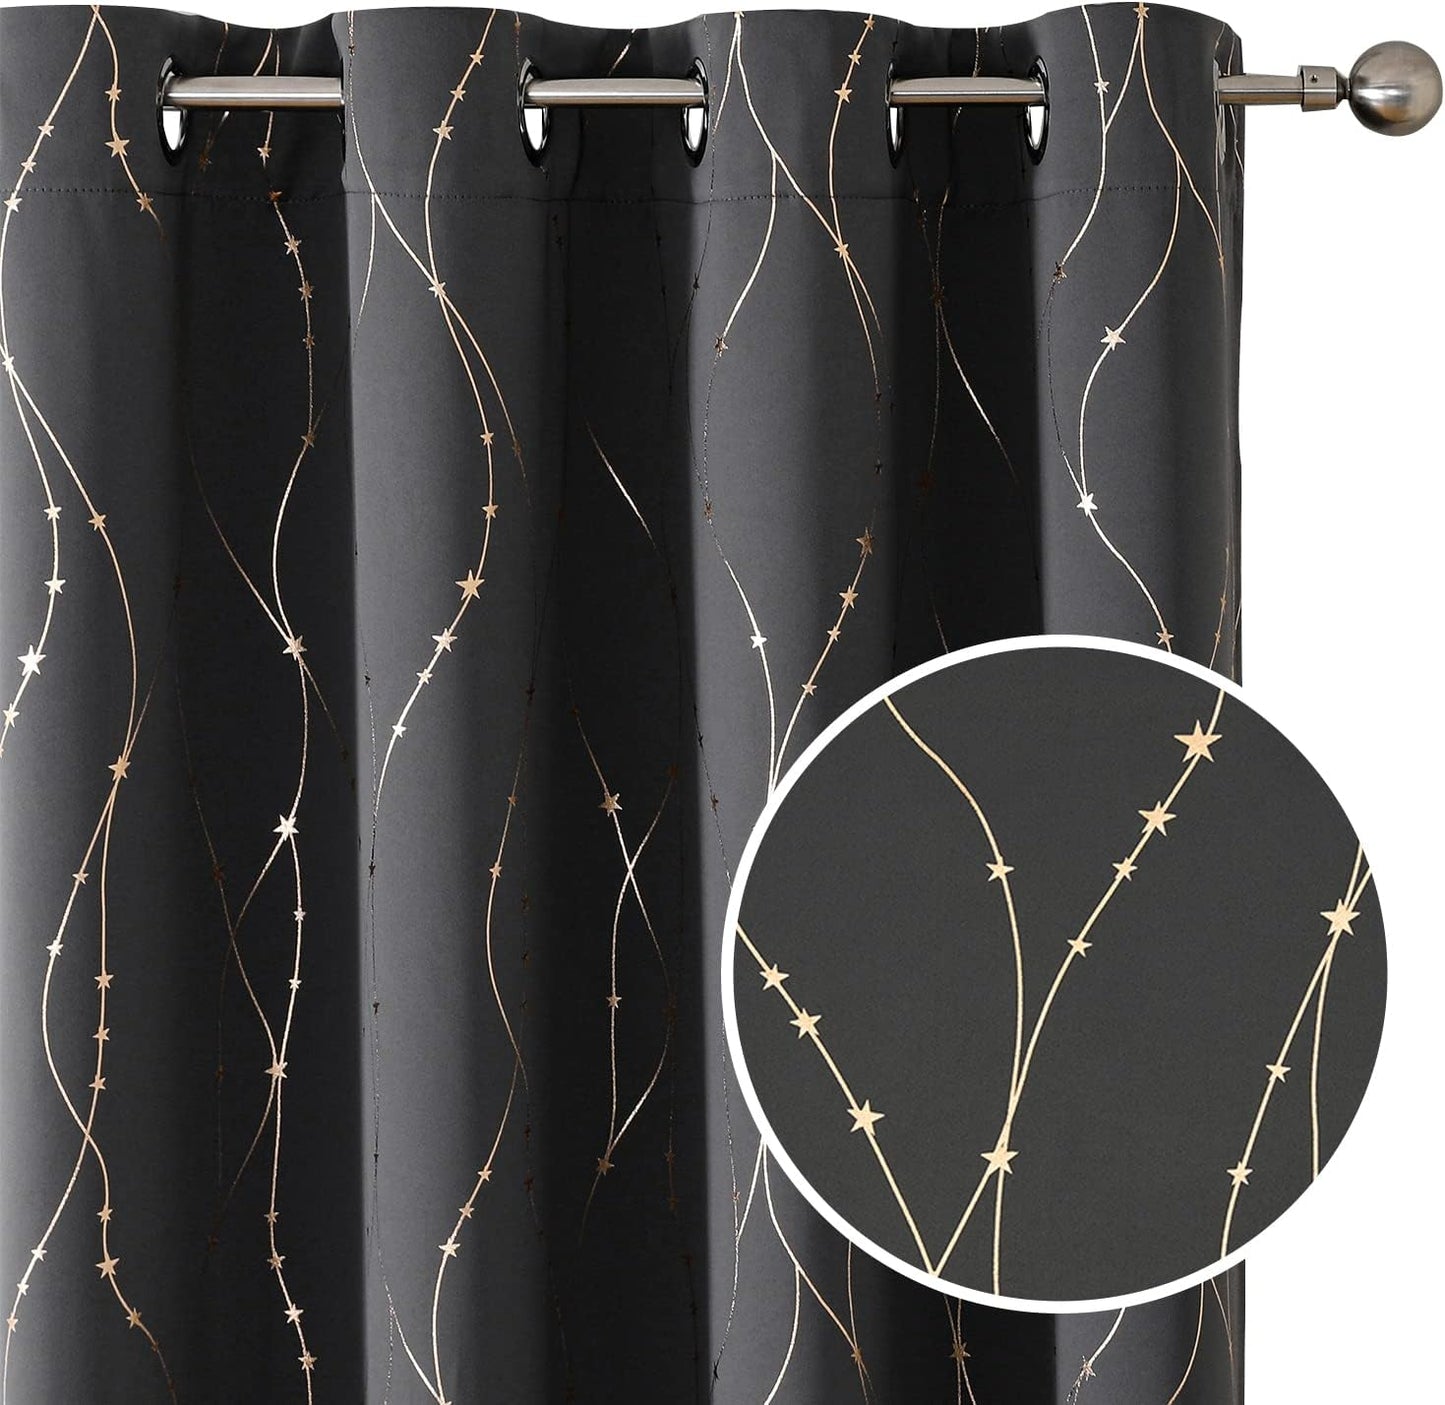 SMILE WEAVER Black Blackout Curtains for Bedroom 72 Inch Long 2 Panels,Room Darkening Curtain with Gold Print Design Noise Reducing Thermal Insulated Window Treatment Drapes for Living Room  SMILE WEAVER Dark Grey Gold 52Wx96L 